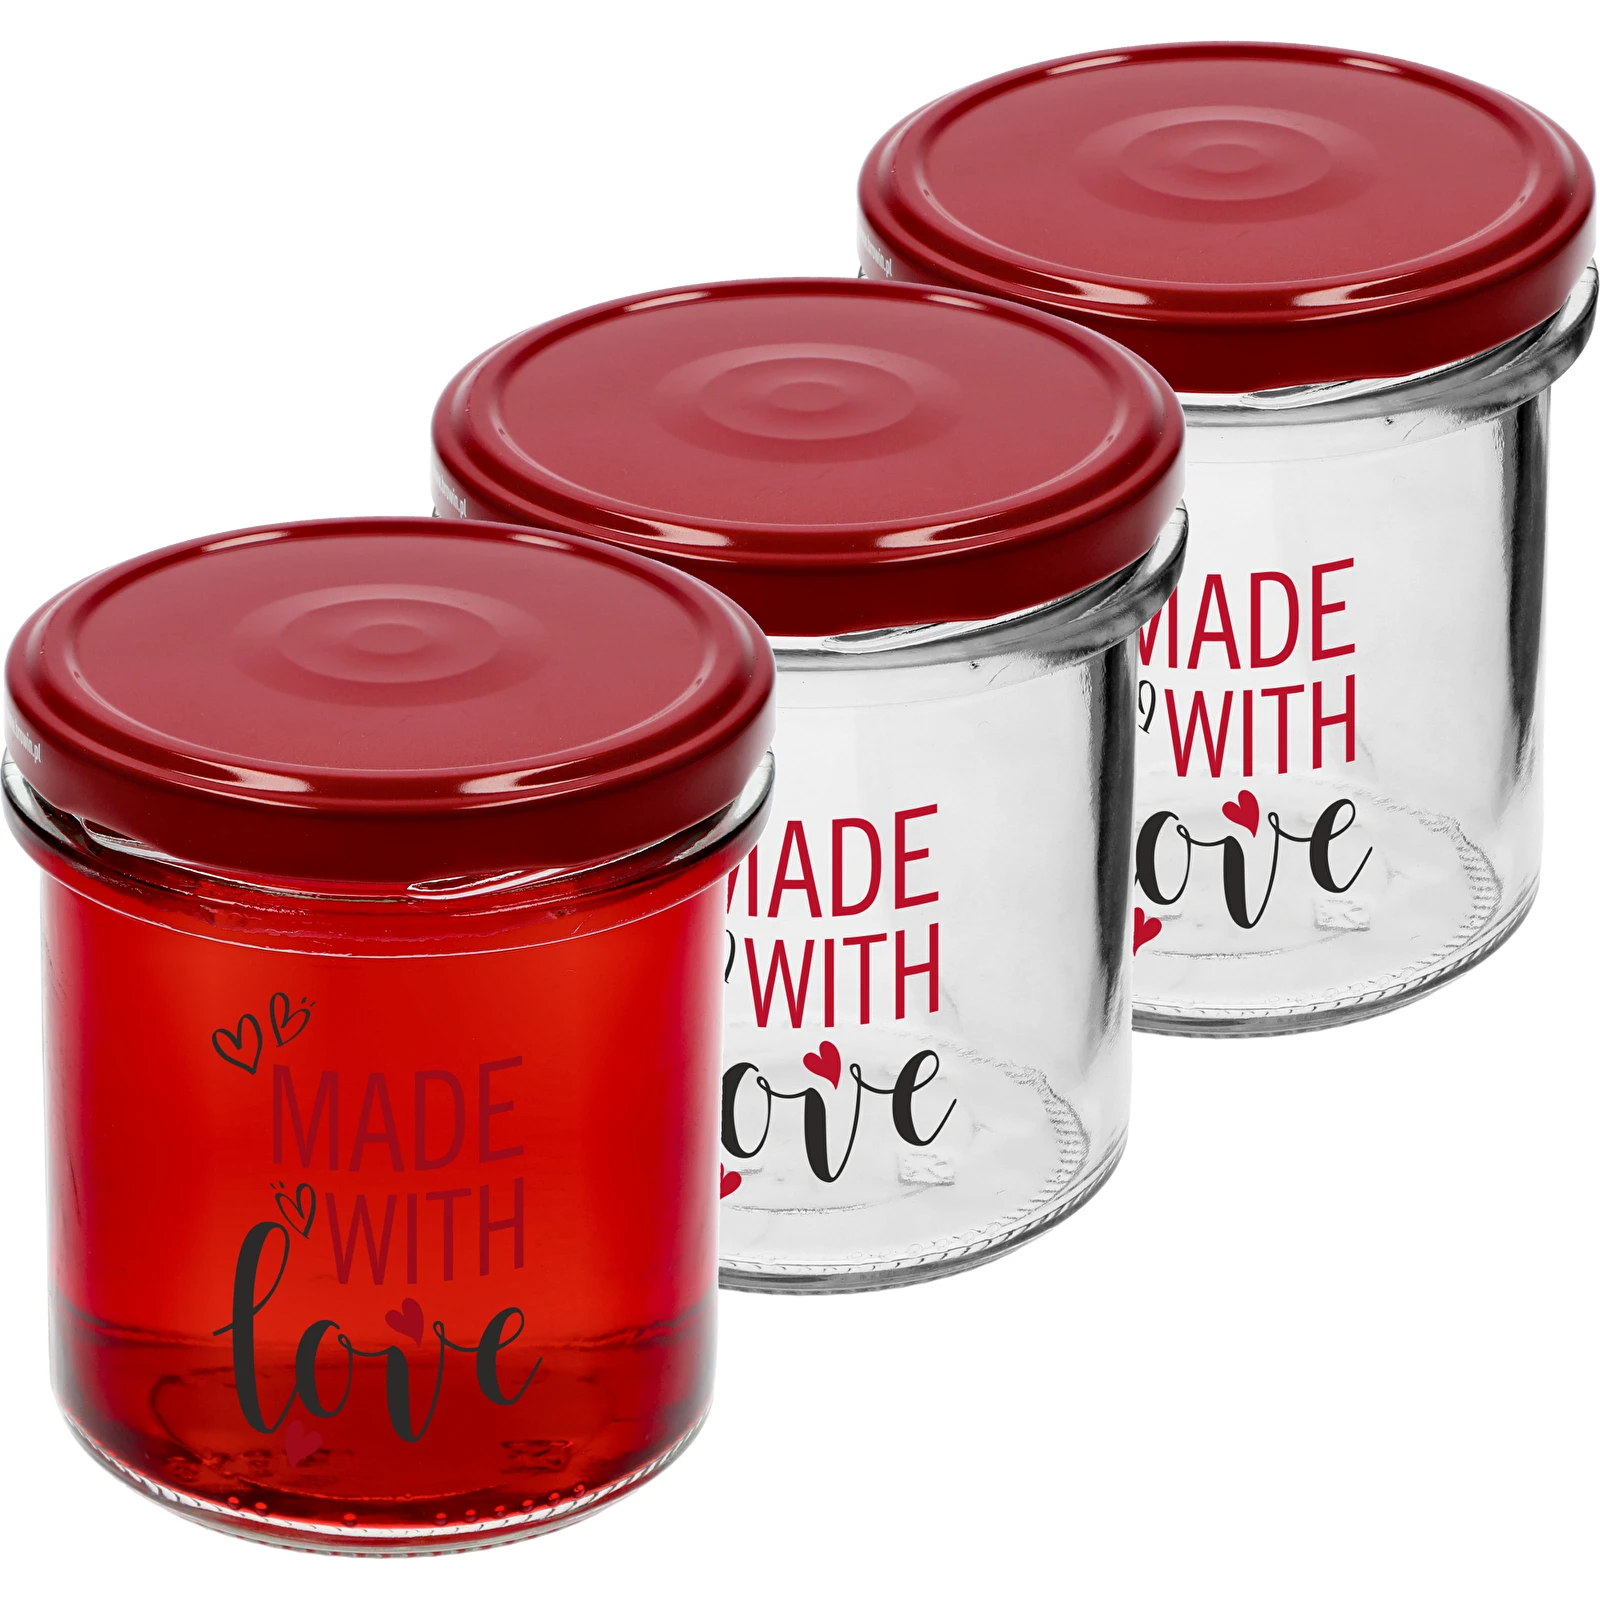 https://browin.com/static/images/1600/346-ml-twist-off-jar-with-a-made-with-love-print-maroon-lid-o82-6-3-pcs-shrinkwrap-pack-132360_.webp